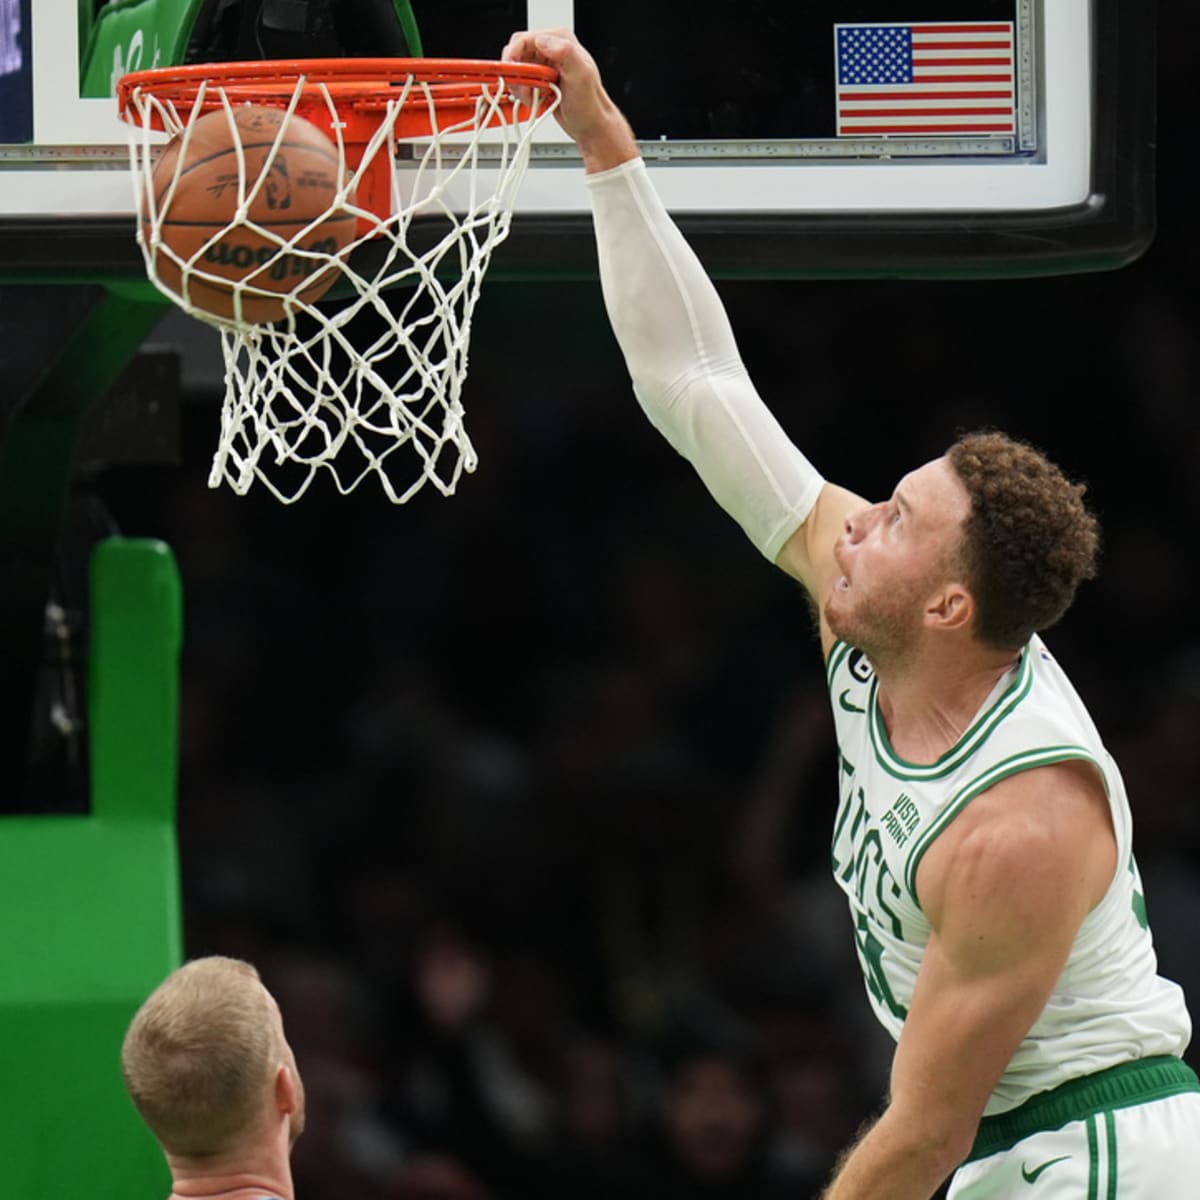 Boston's Blake Griffin on his role with the Celtics this season